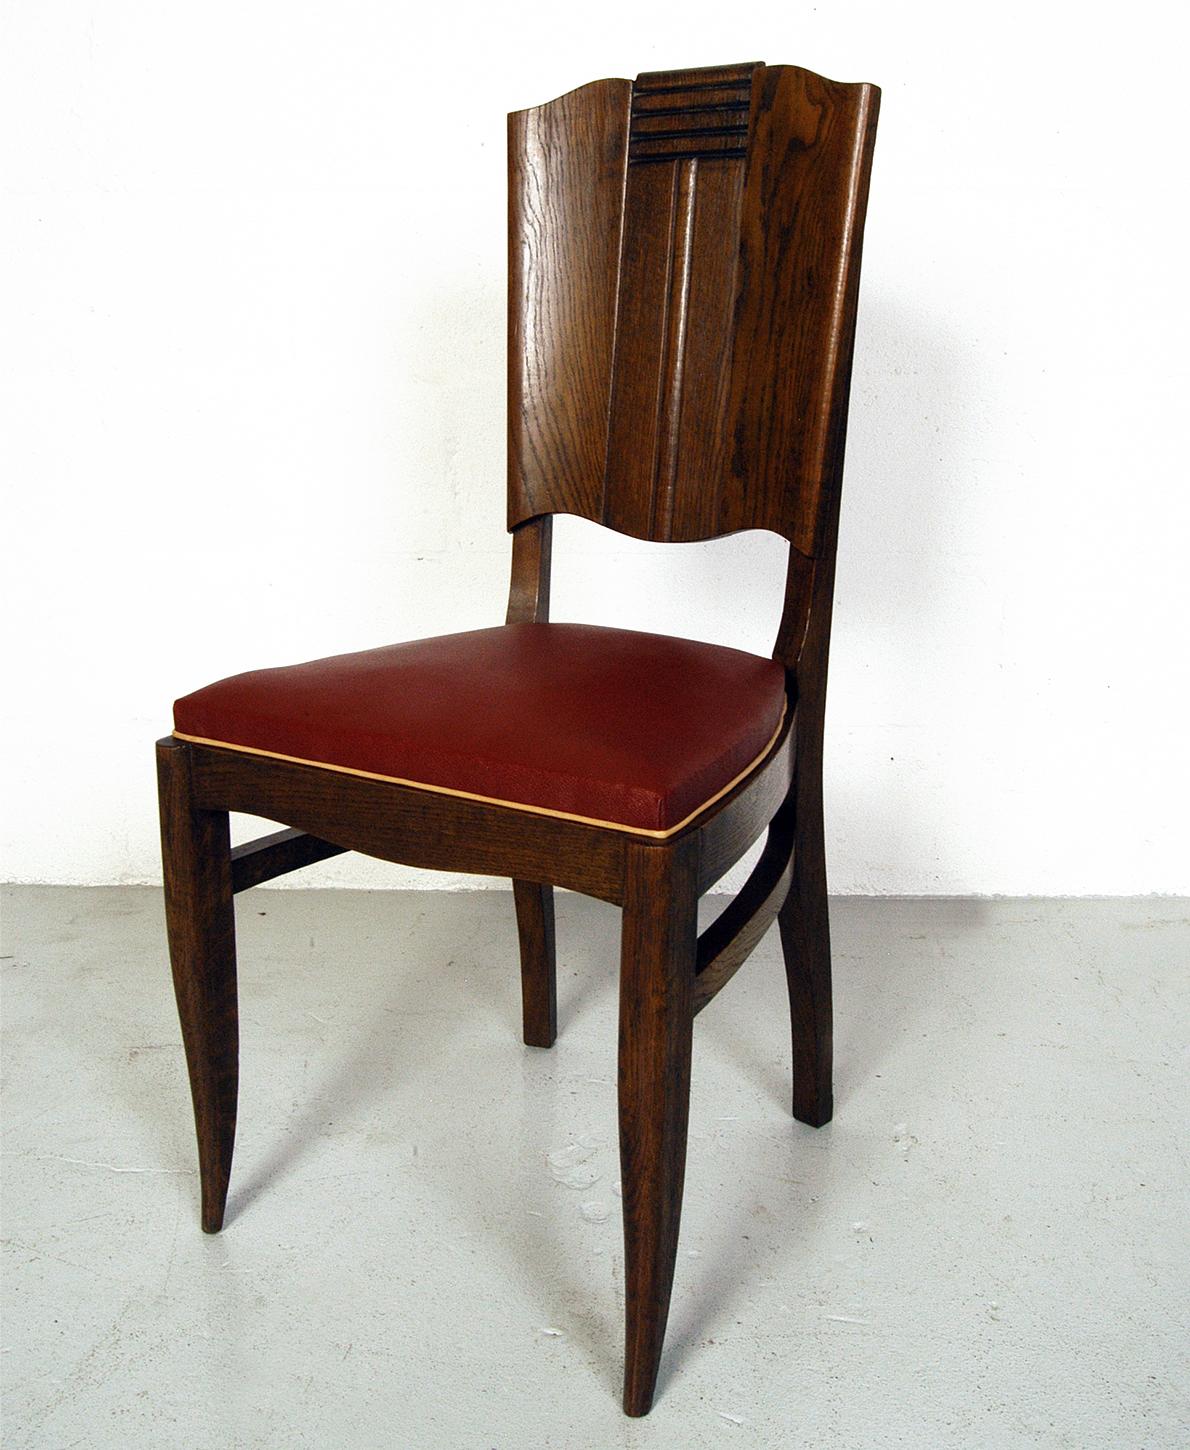 A magnificent set of six Modernist Art Deco dining chairs attributed to Charles Dudouyt in original period burgundy Rexine with cream piping. Carved oak detailing to the back and elegant modernist sabre-shape to the front legs. The seats are sprung